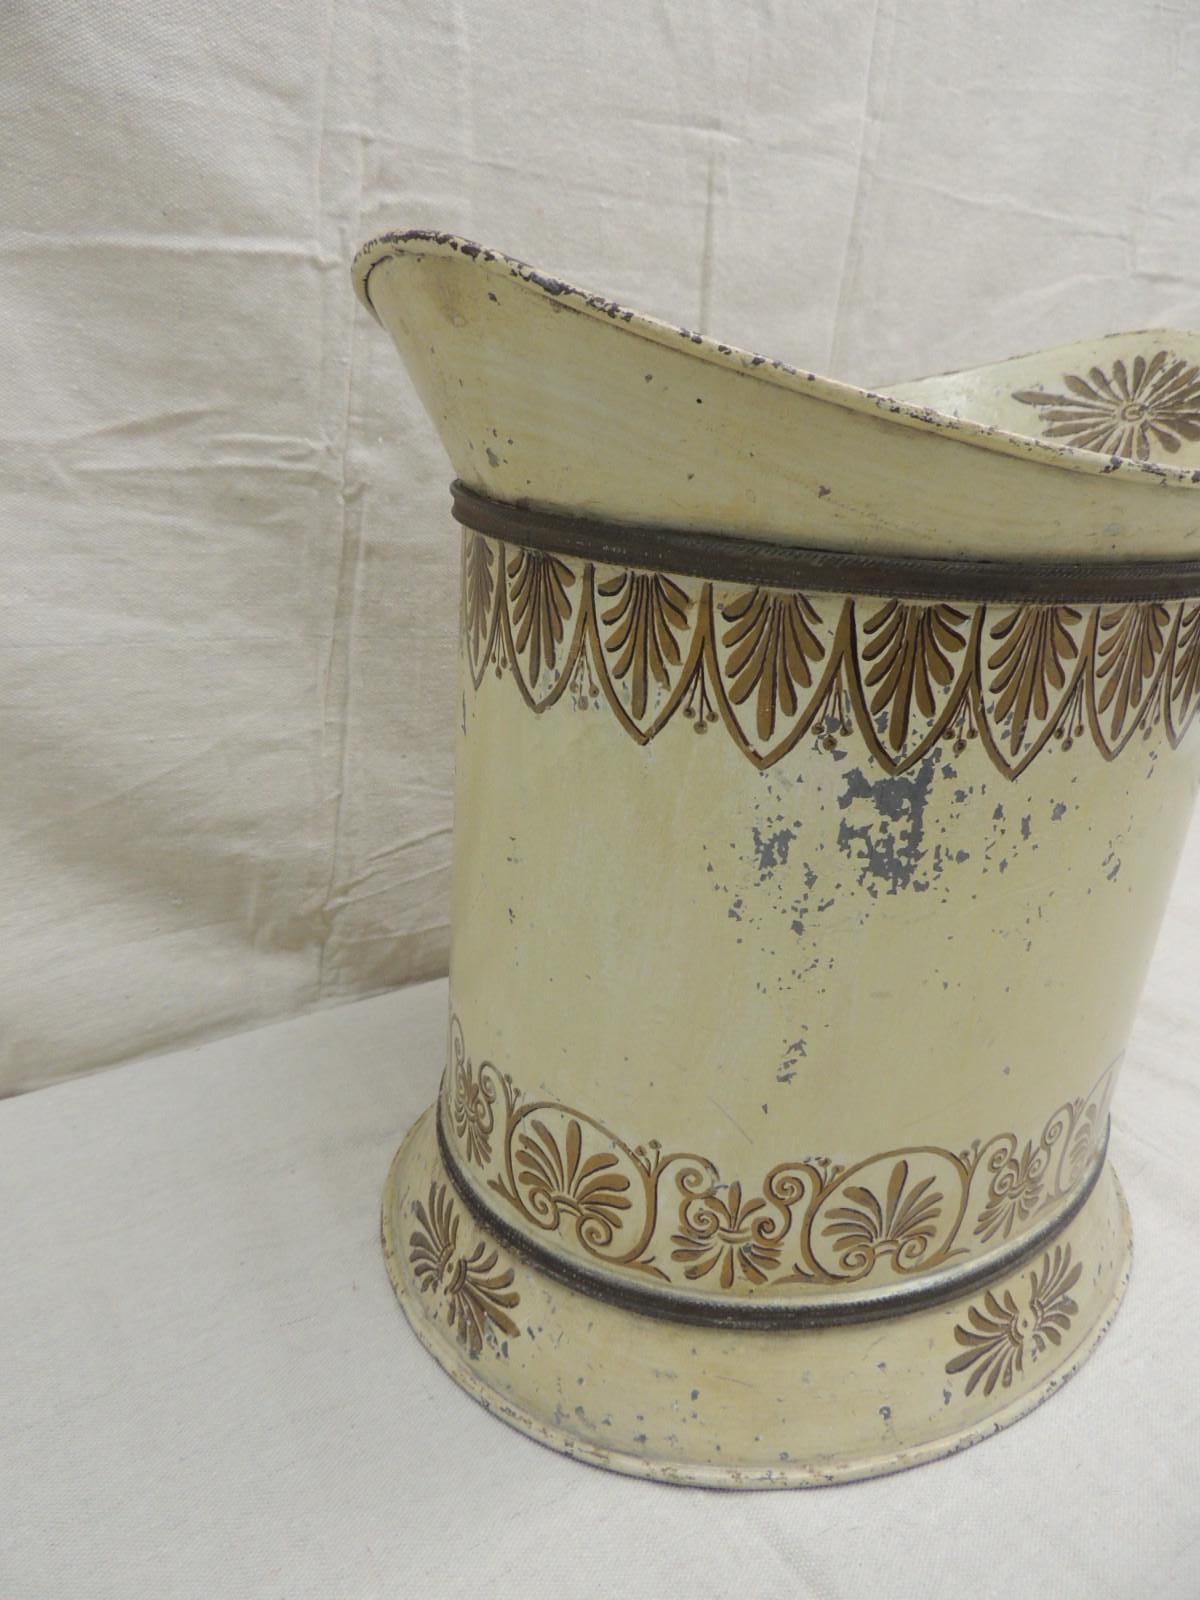 Antique tole cream and gold wastebasket from The Collection of Villa Fiorentina.
From the Sotheby's Sale in 2001. In the catalog is listed on PG.48.
(The legendary home of Lady Kenmare and Rory Cameron, later Mary Wells and Harding Lawrence, who had